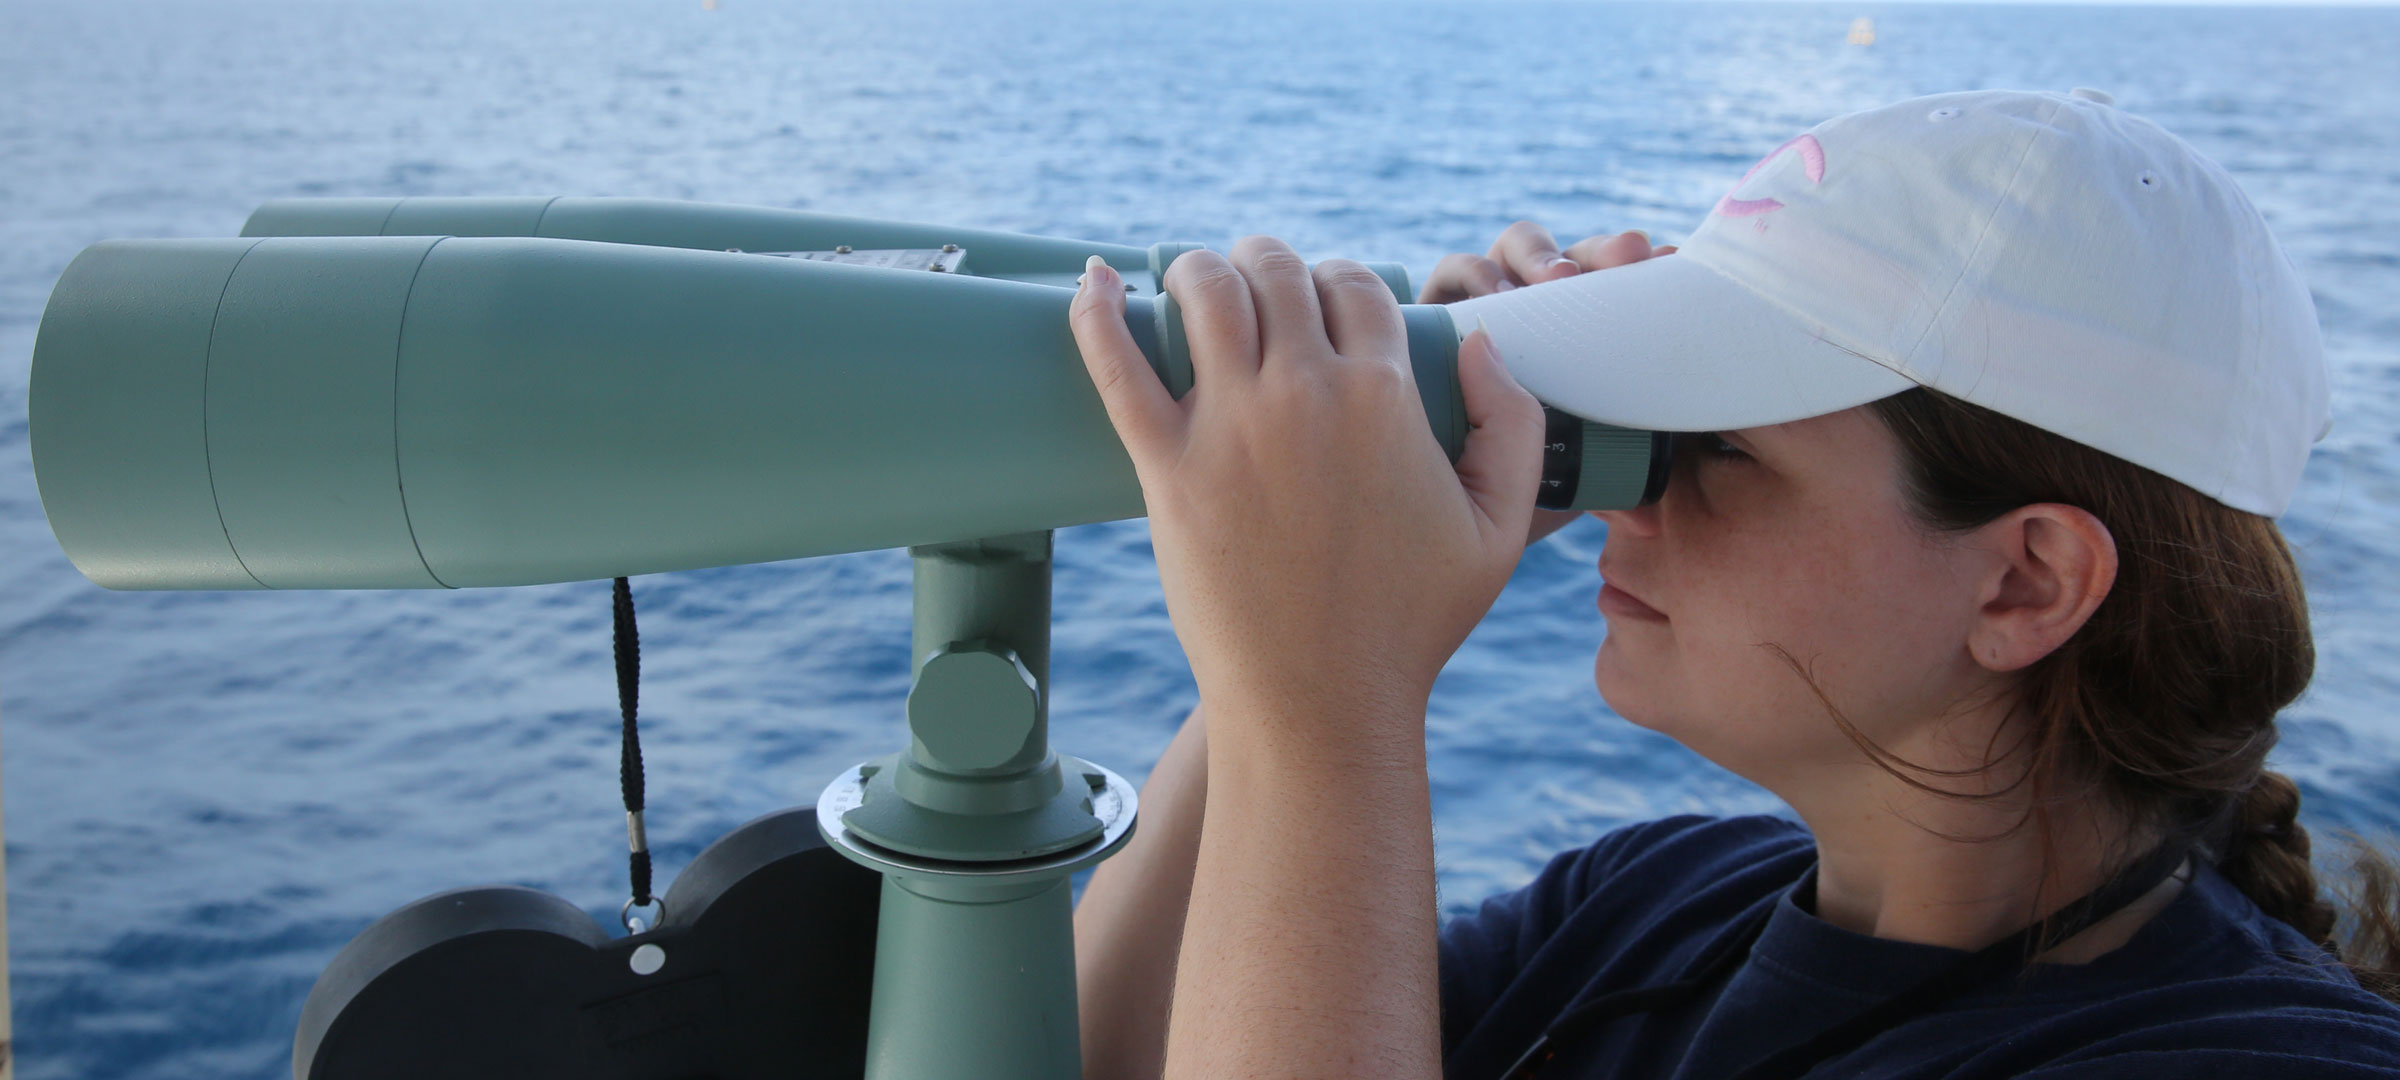 A University of Louisiana at Lafayette research faculty member looks through binoculars over water during a research trip into the Gulf of Mexico